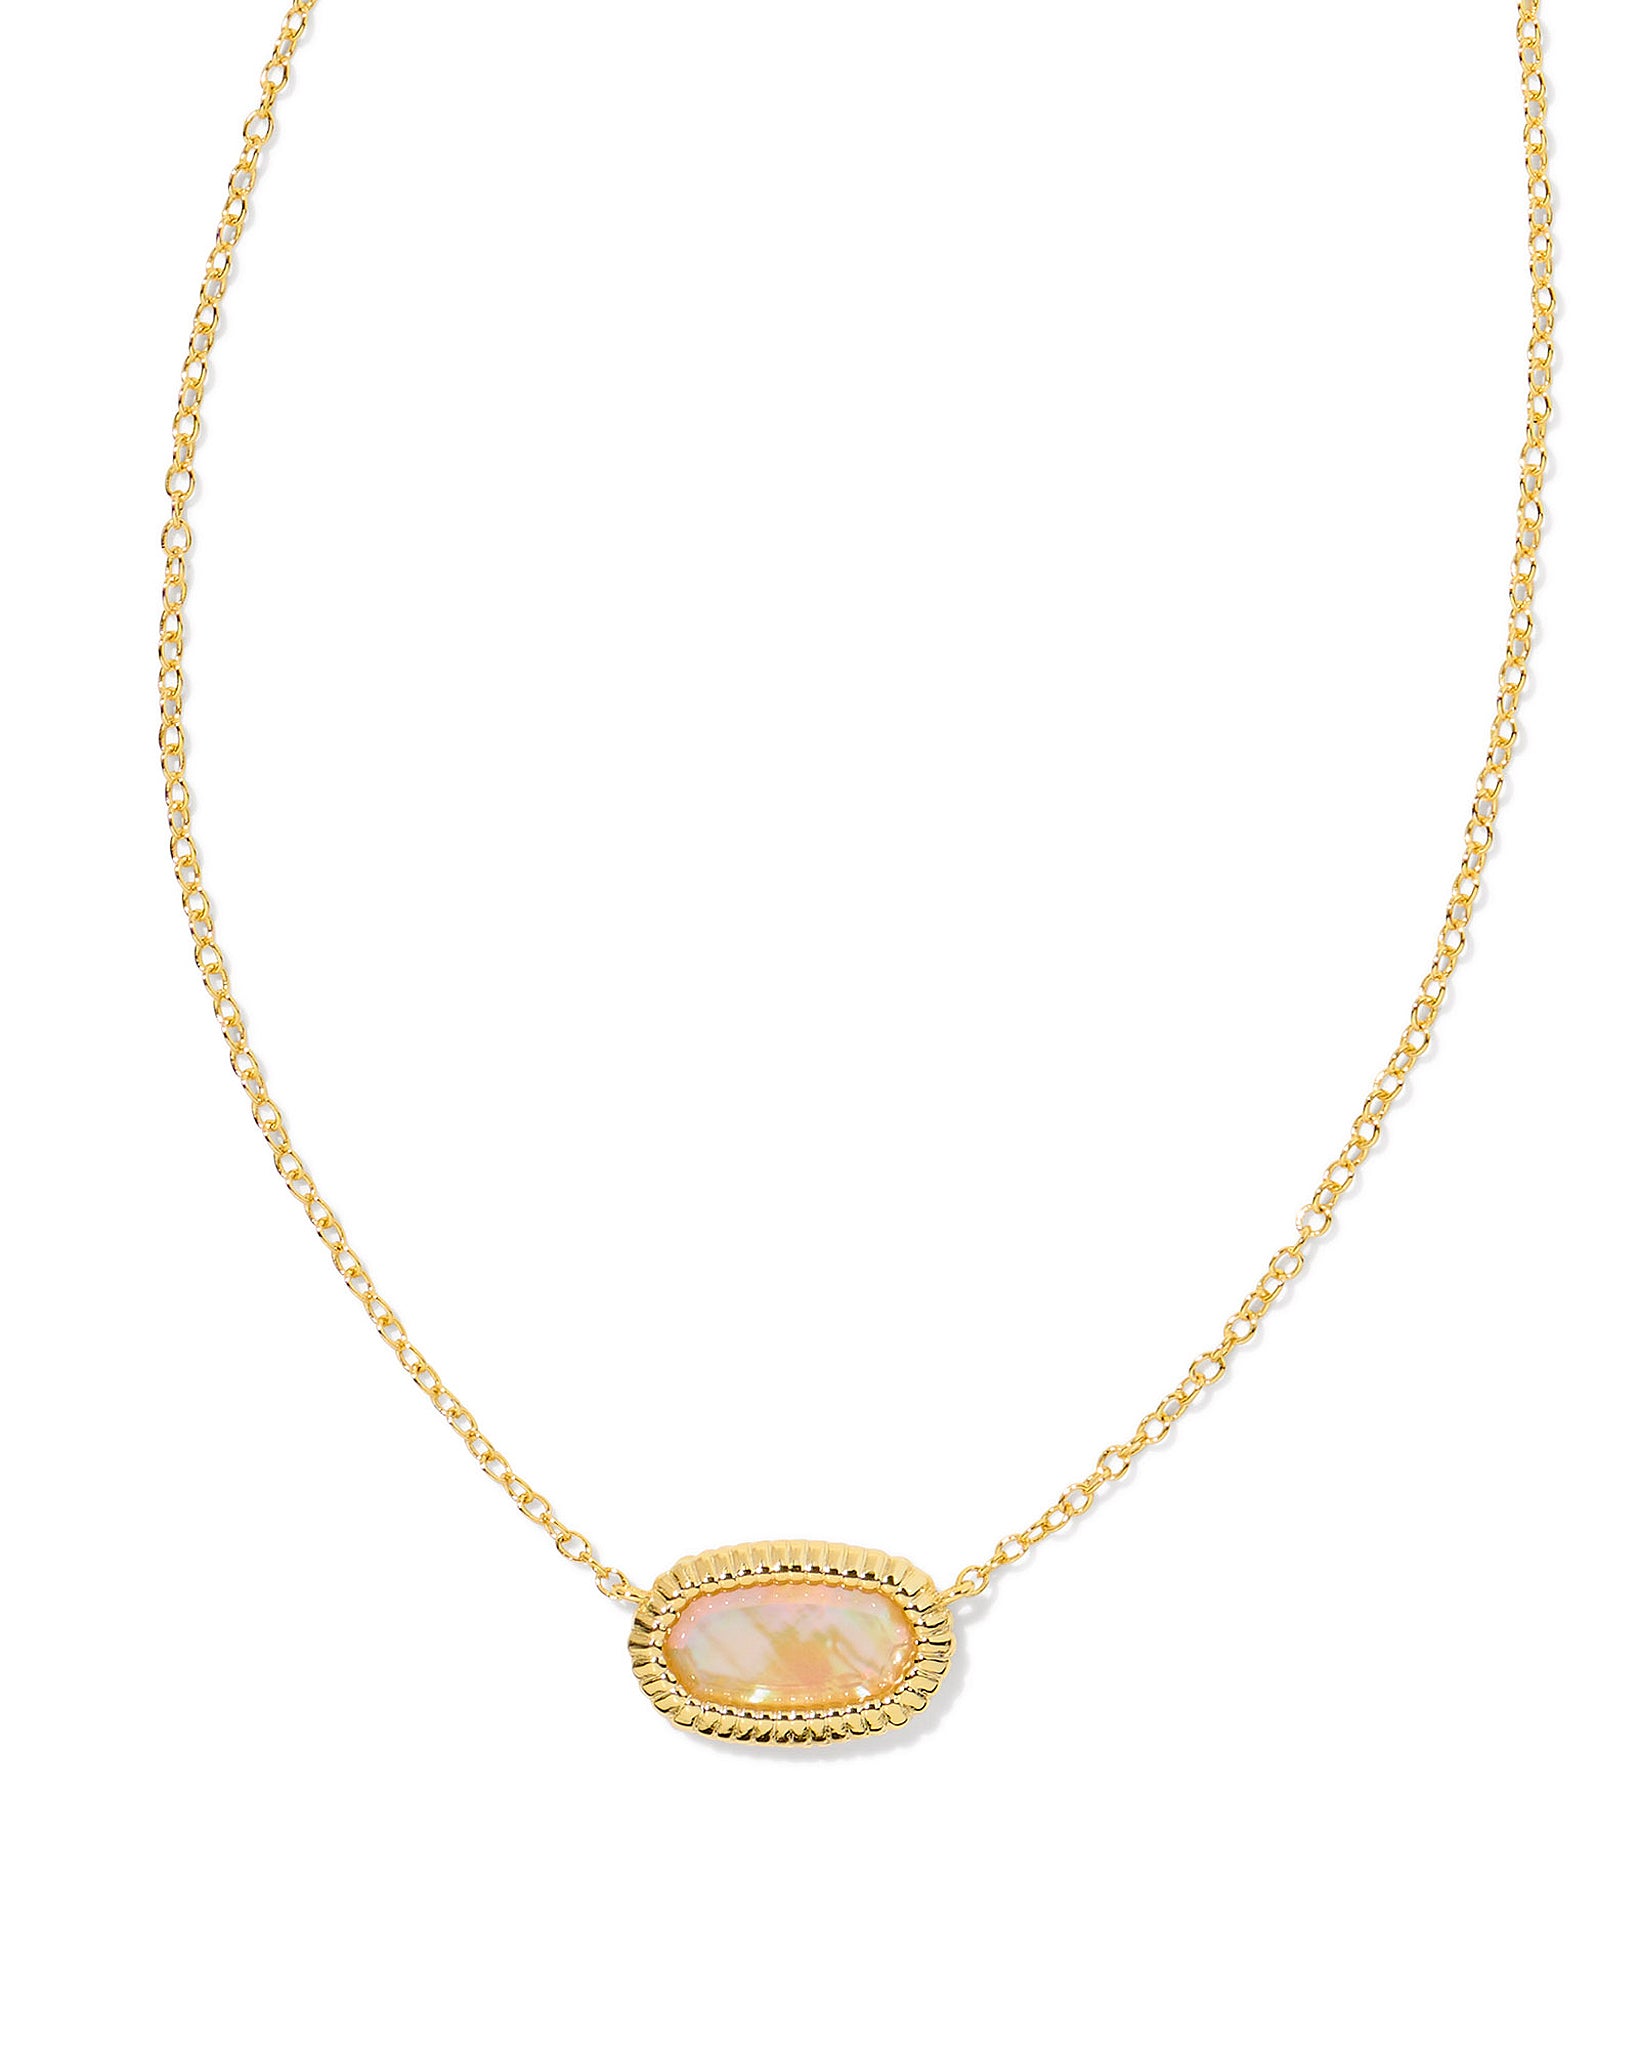 Kendra Scott Elisa Ridge Framed Oval Pendant Necklace in Golden Abalone and Gold Plated